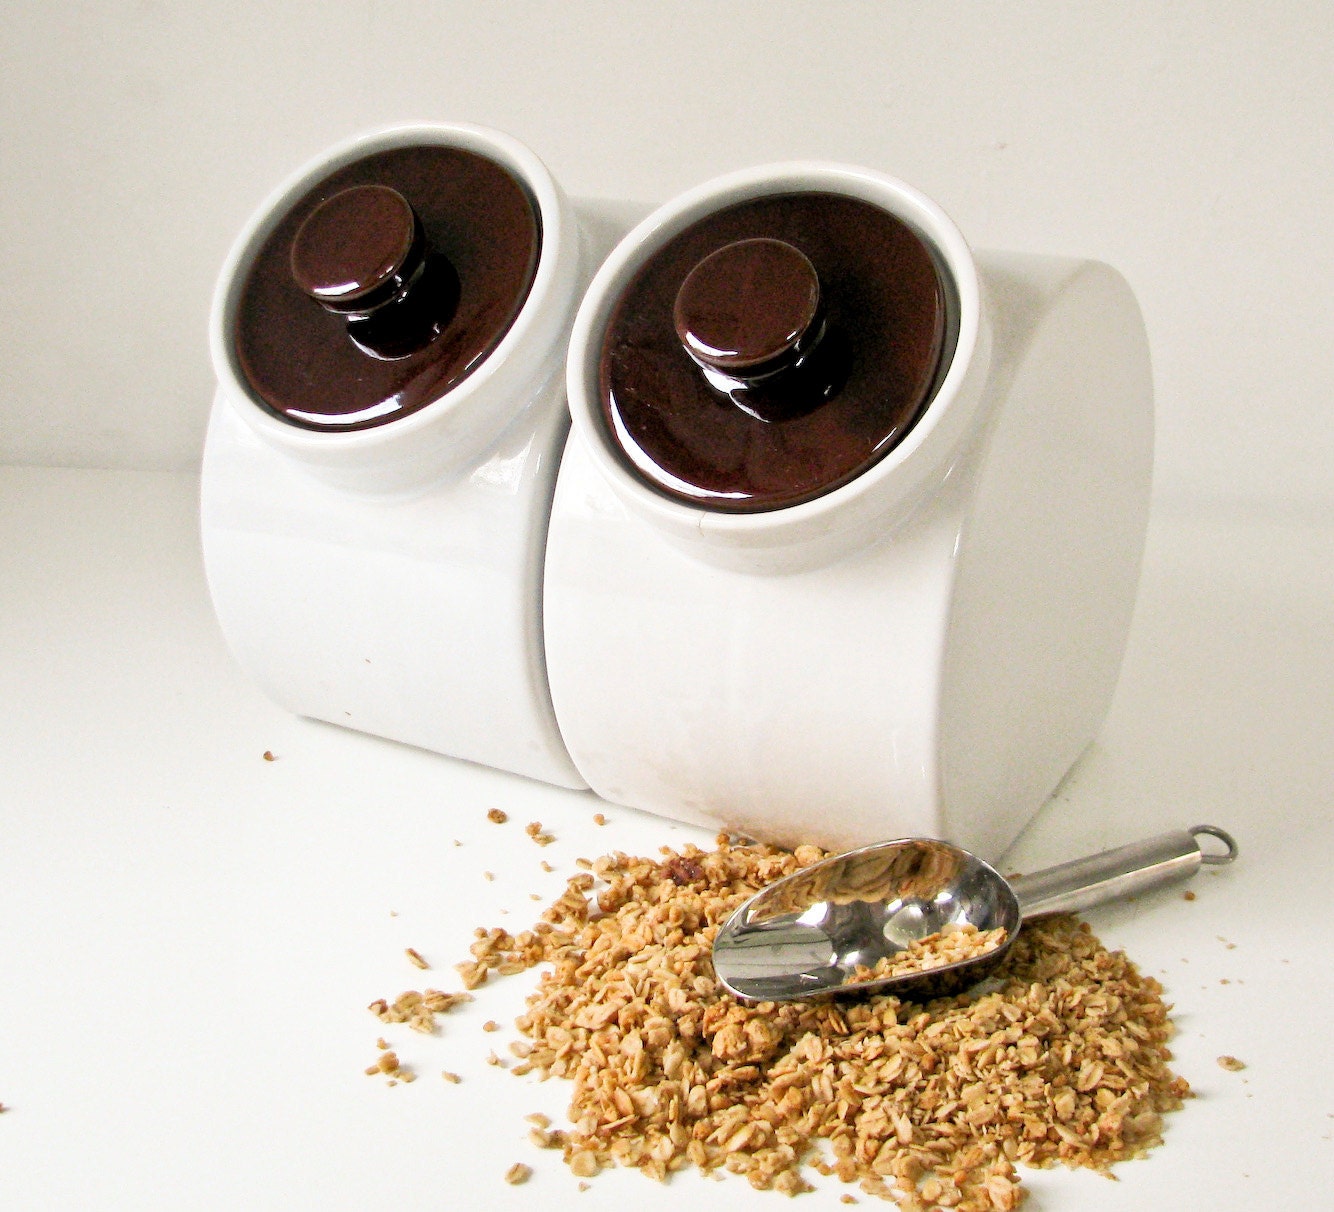 White Ironstone Canisters - Mid Century Modern - BeeJayKay